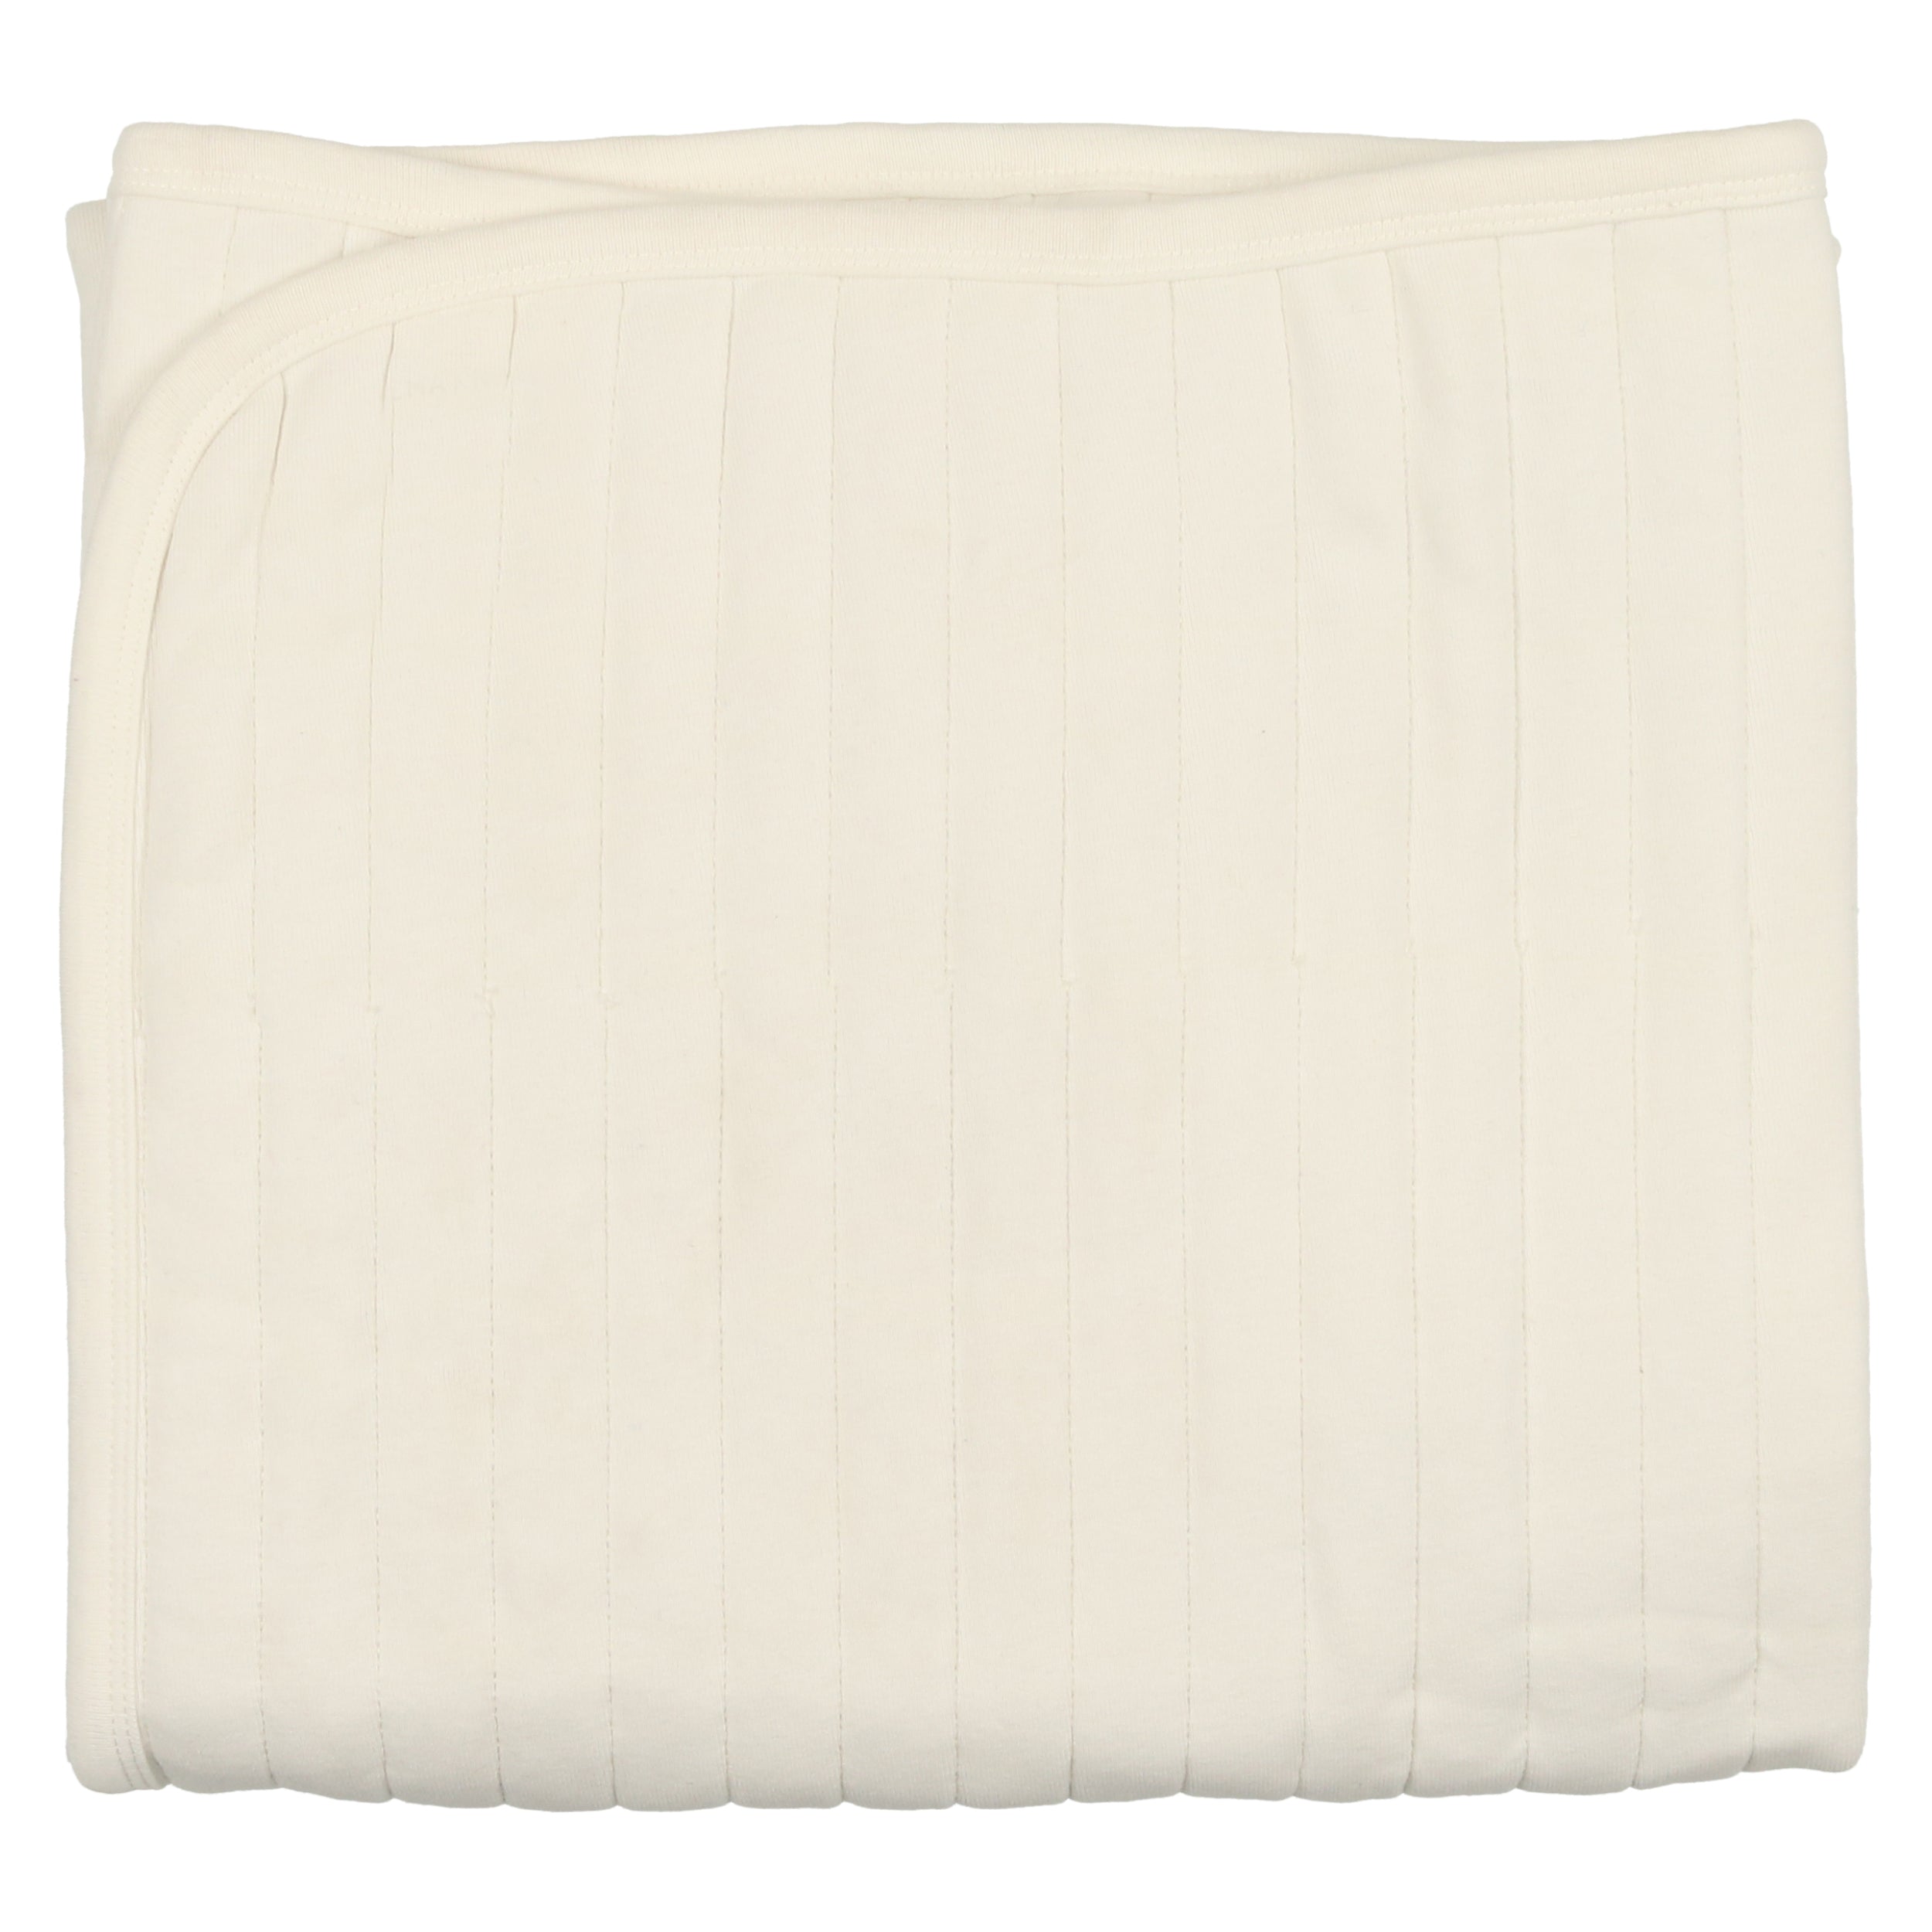 Quilted Blanket - White